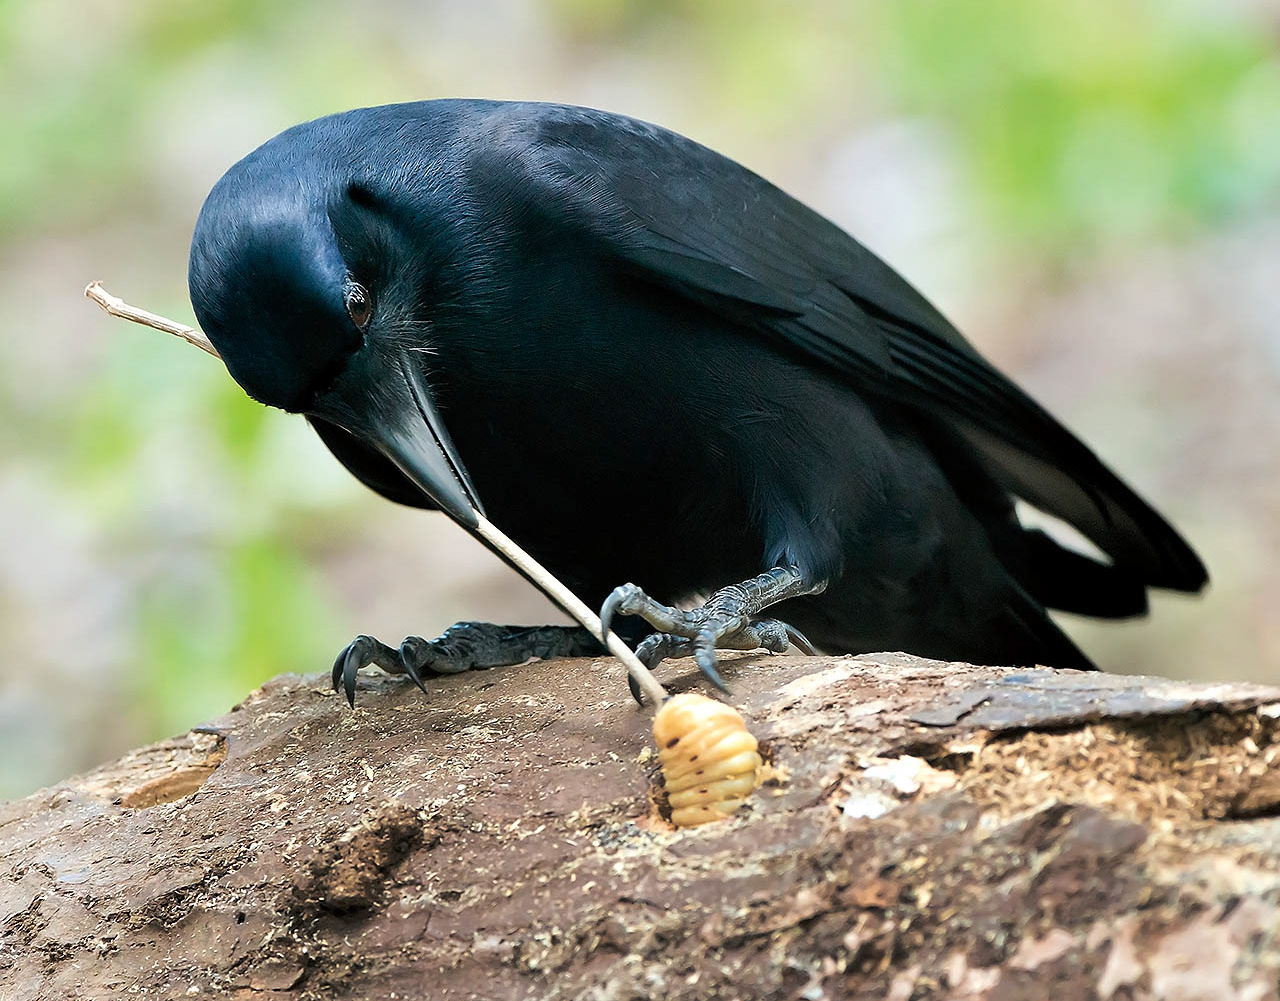 Crow using stick to get grub from branch